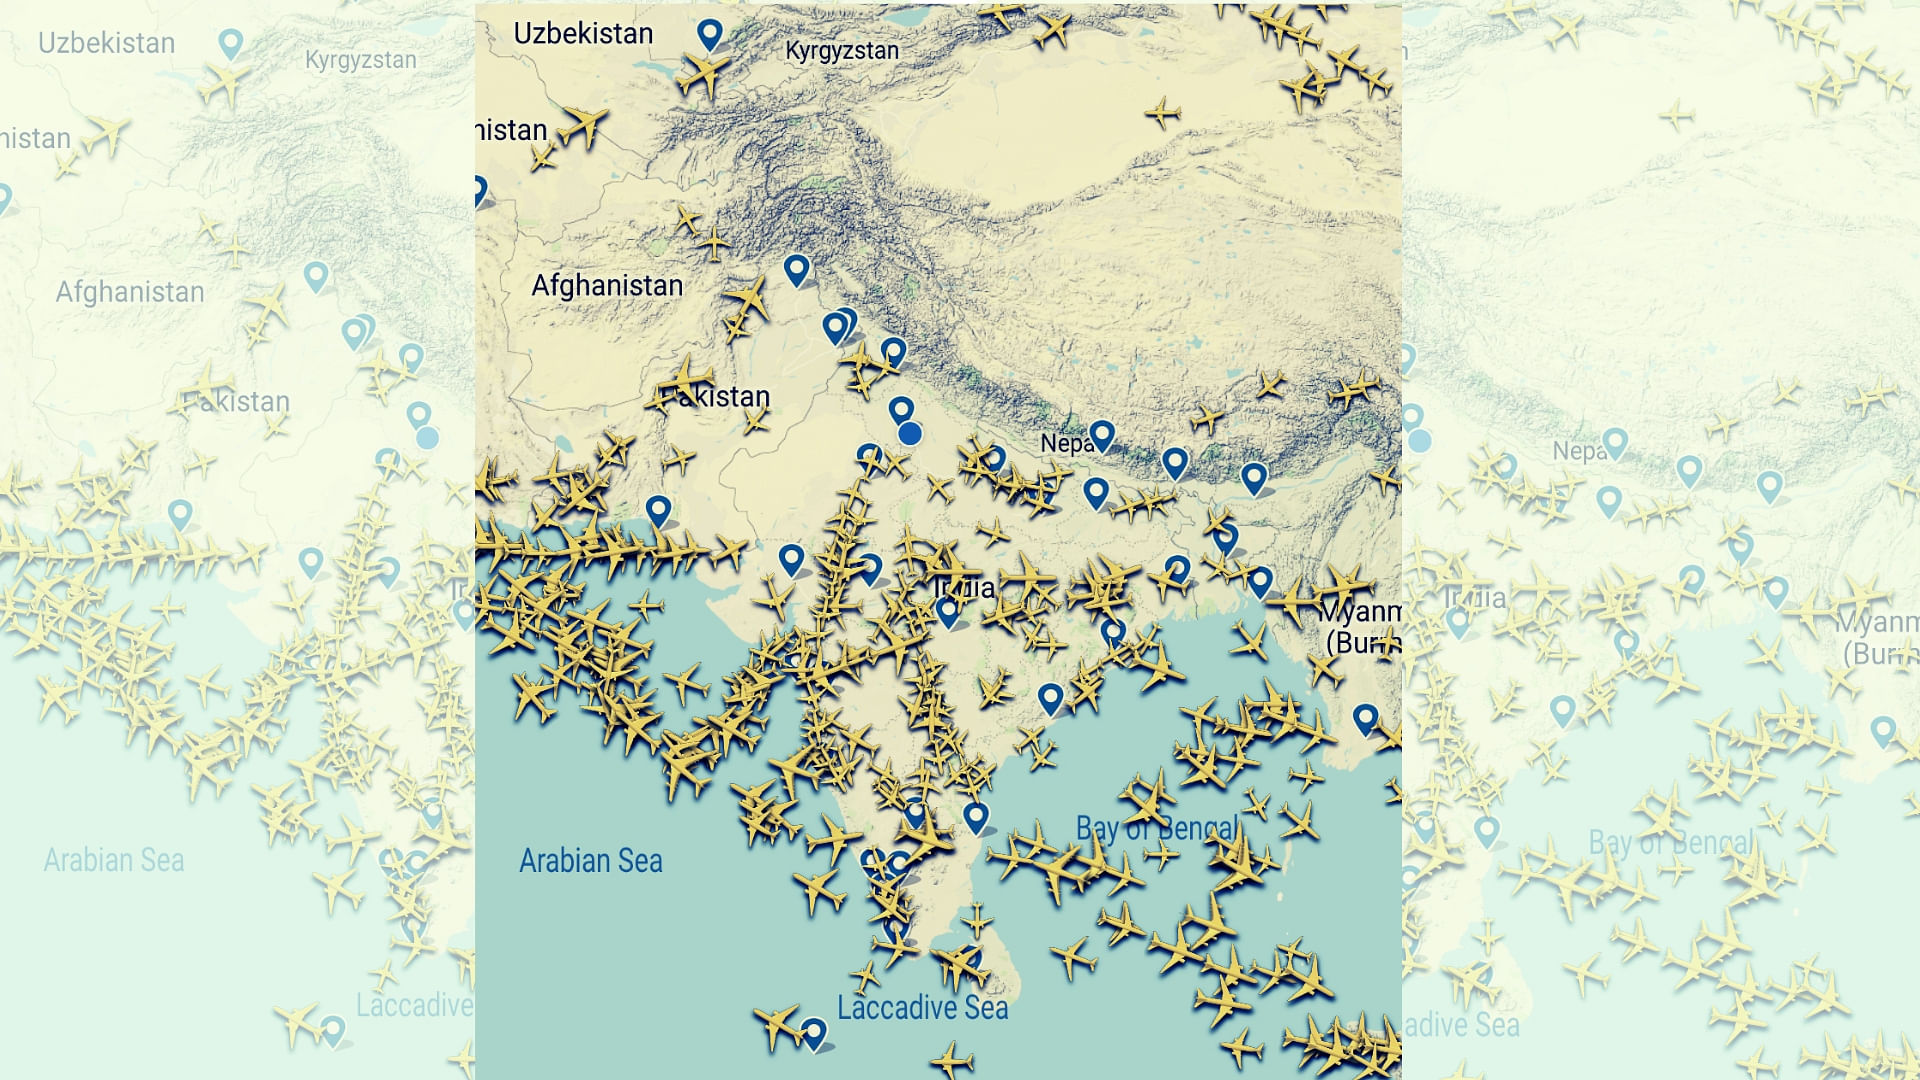 View of the south Asian airspace on Friday, 14 June.